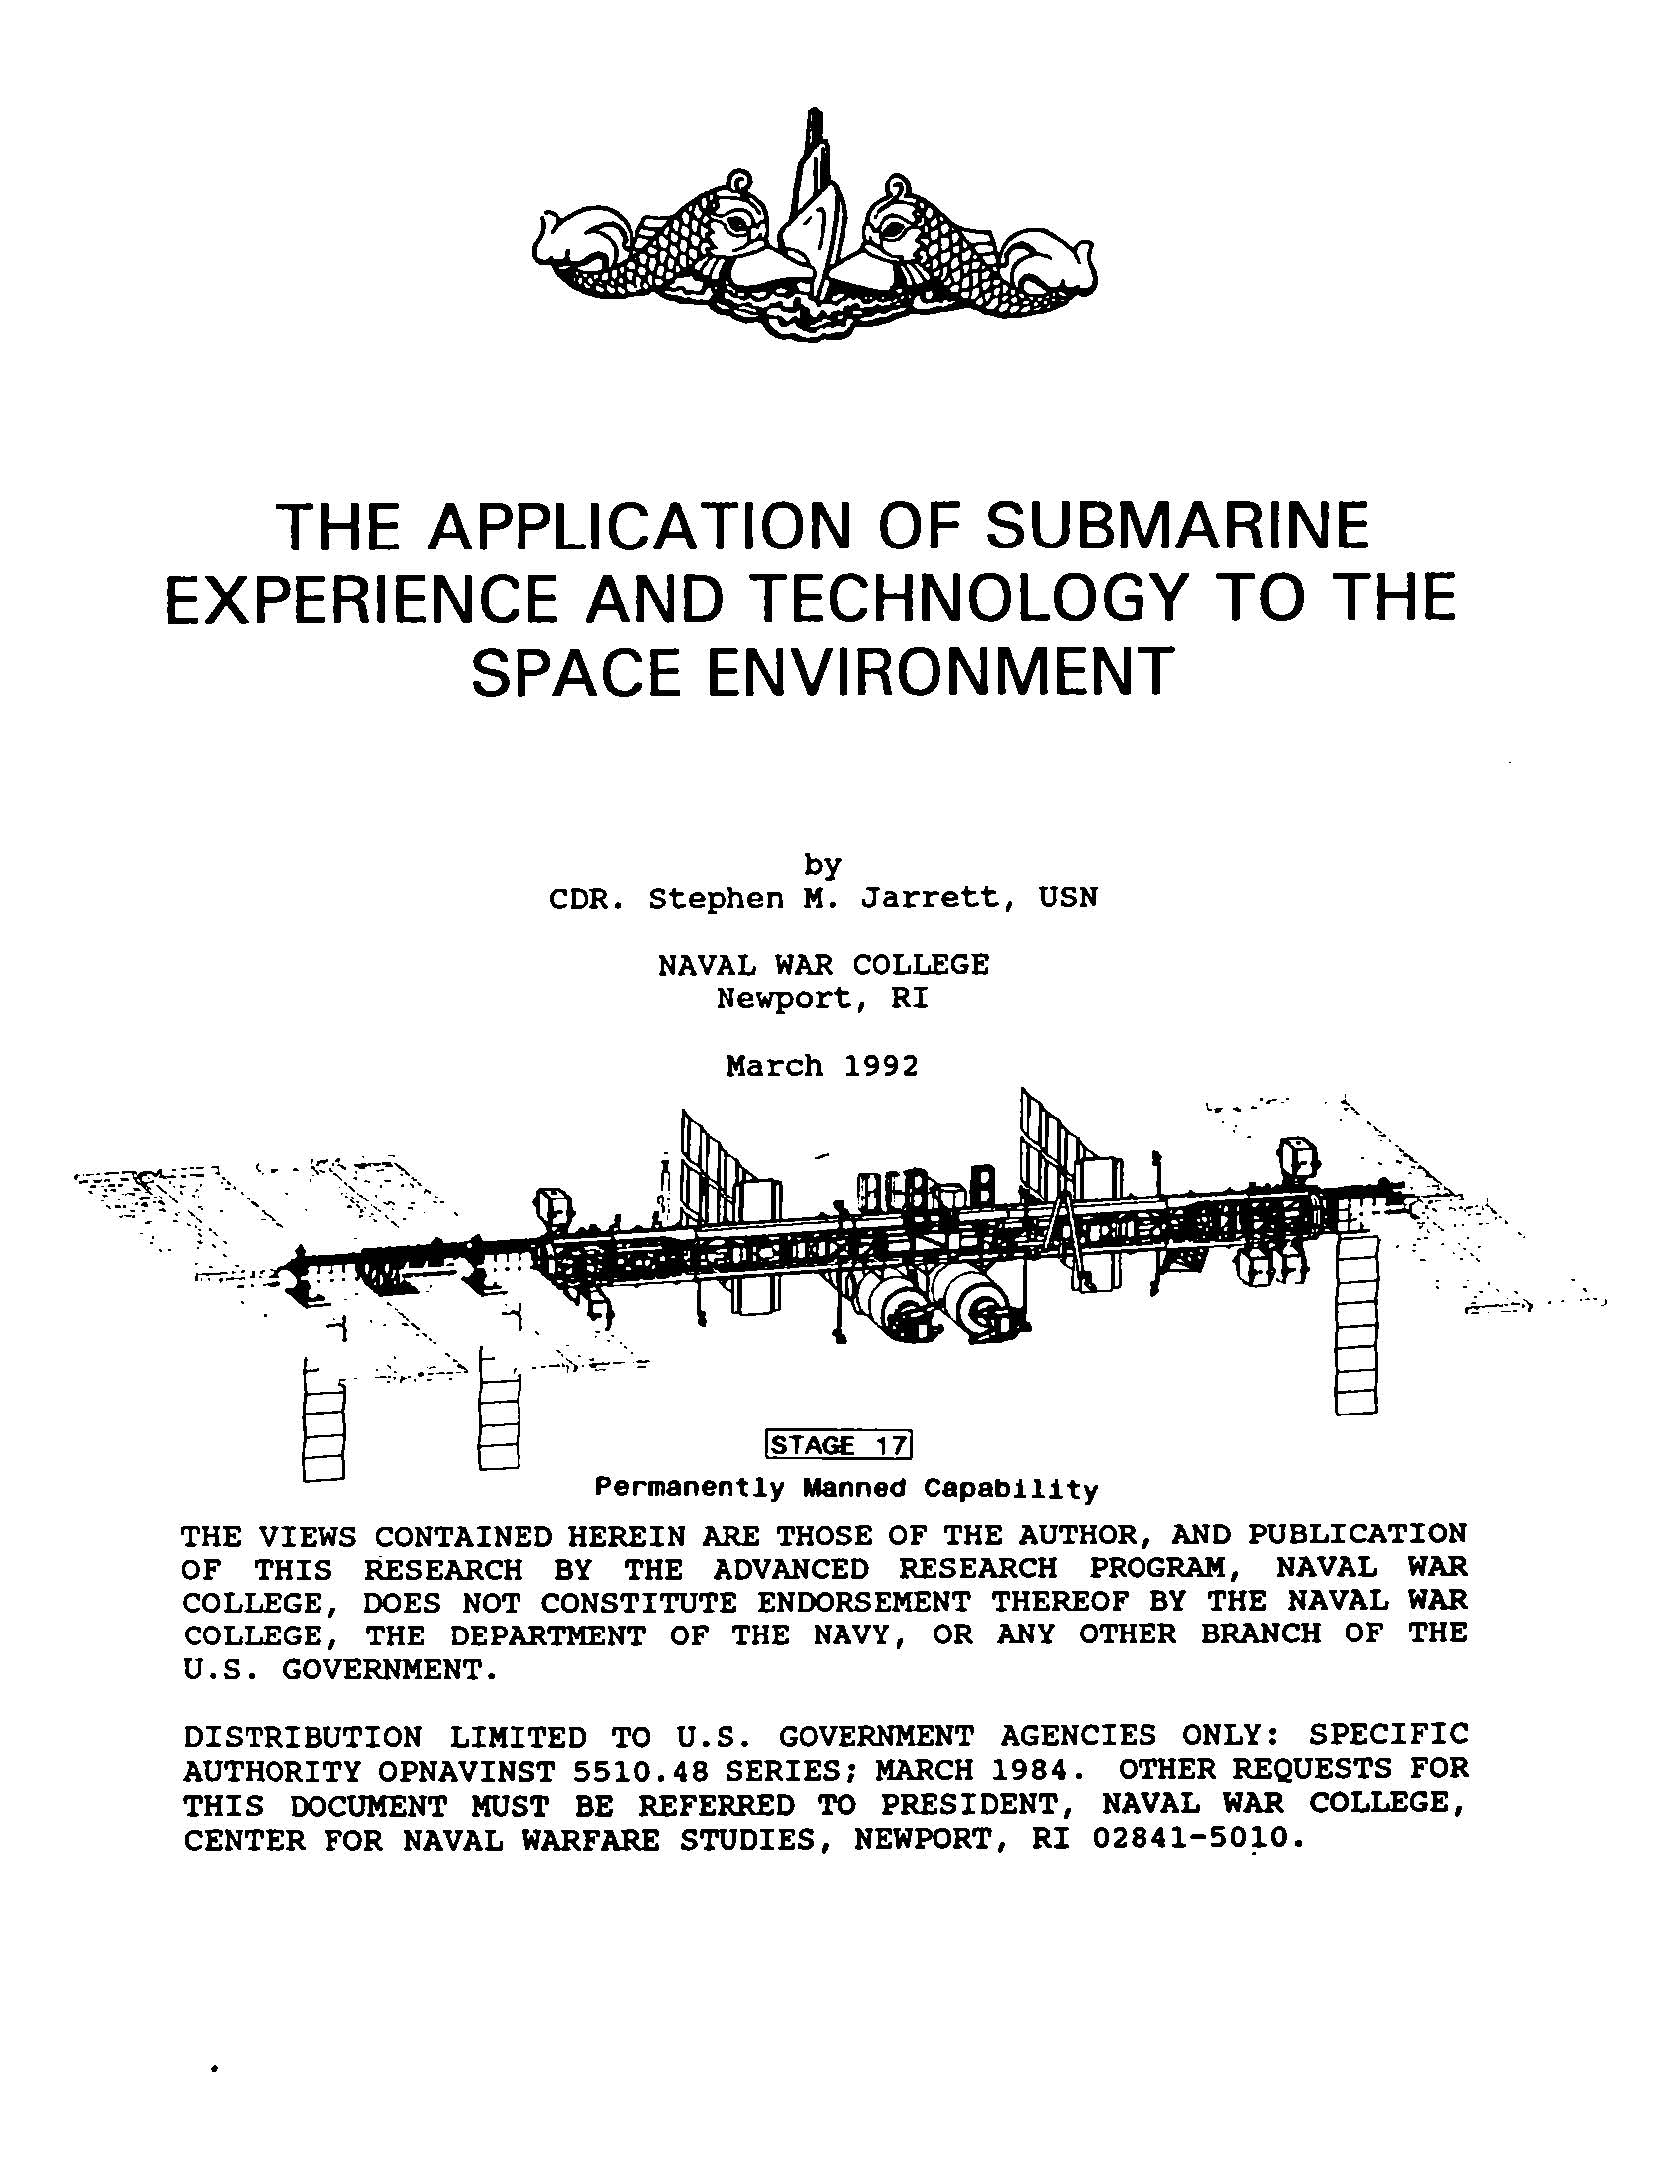 Application Of Submarine Experience And Technology To The Space Environment, by Stephen M. Jarrett